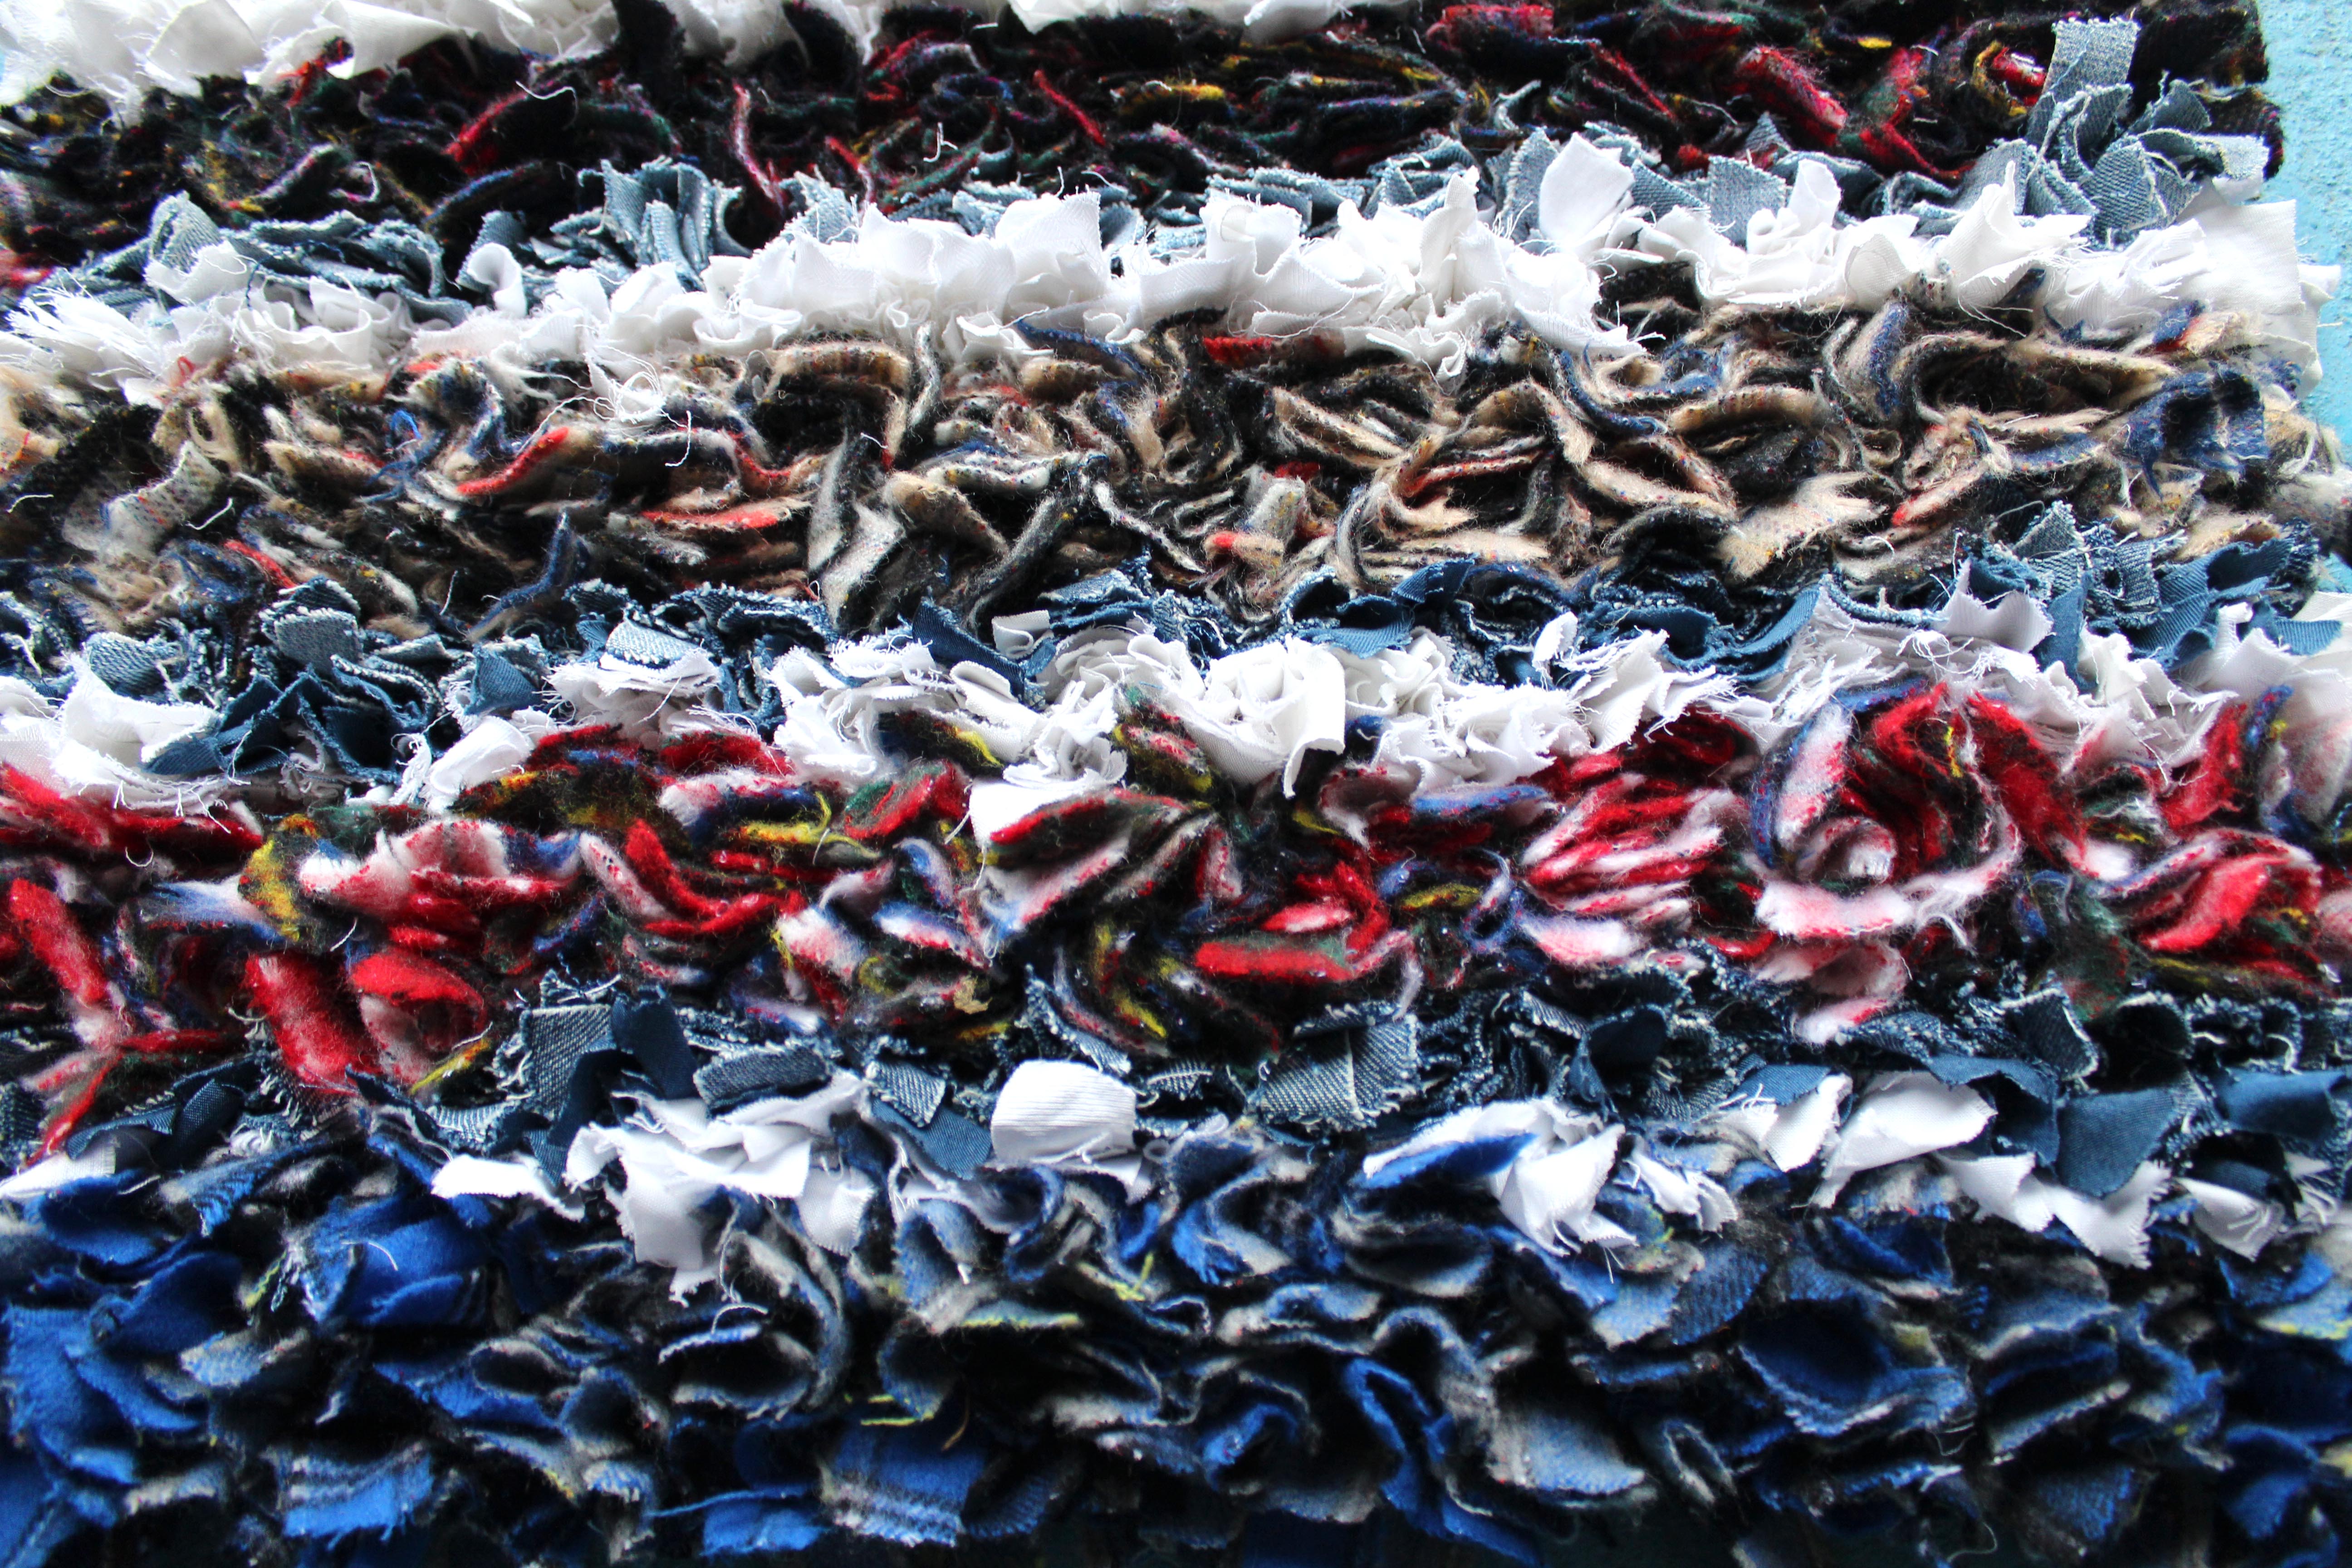 British traditional hessian rag rug made using old woollen blankets, jeans and shirts